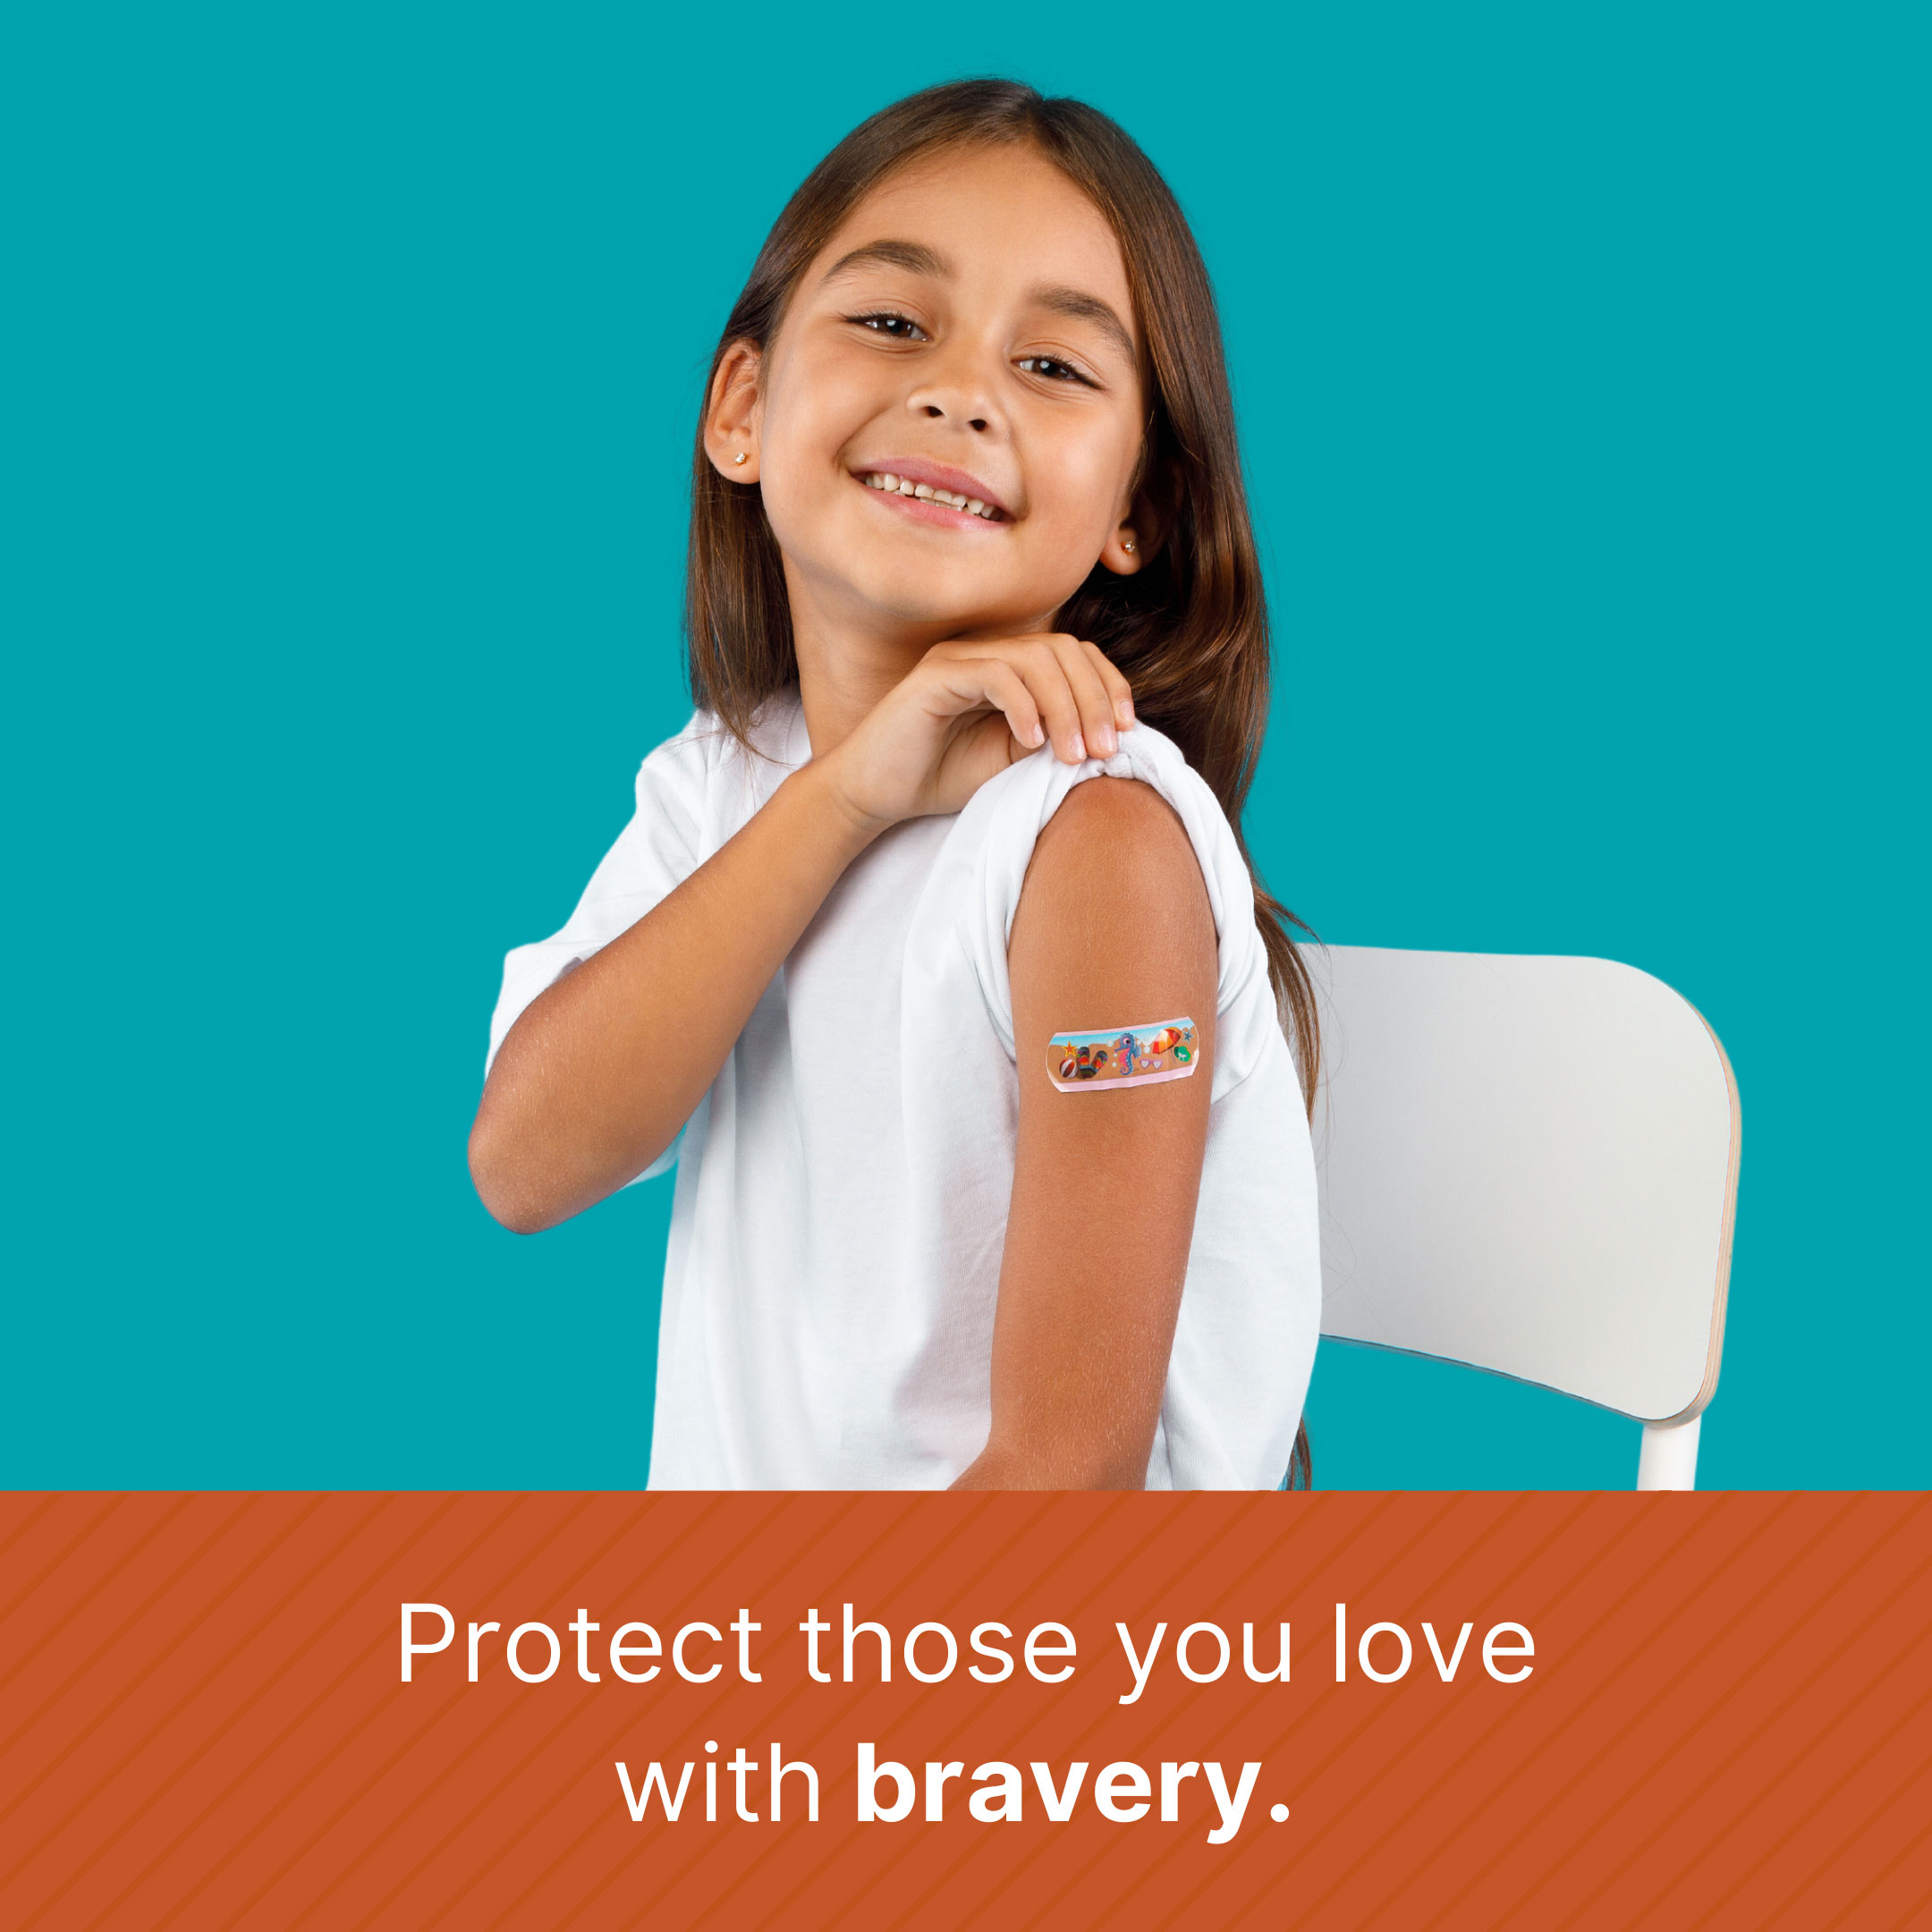 Girl looking at the camera while showing her arm with a band-aid on it. Text says: Protect those you love with bravery.